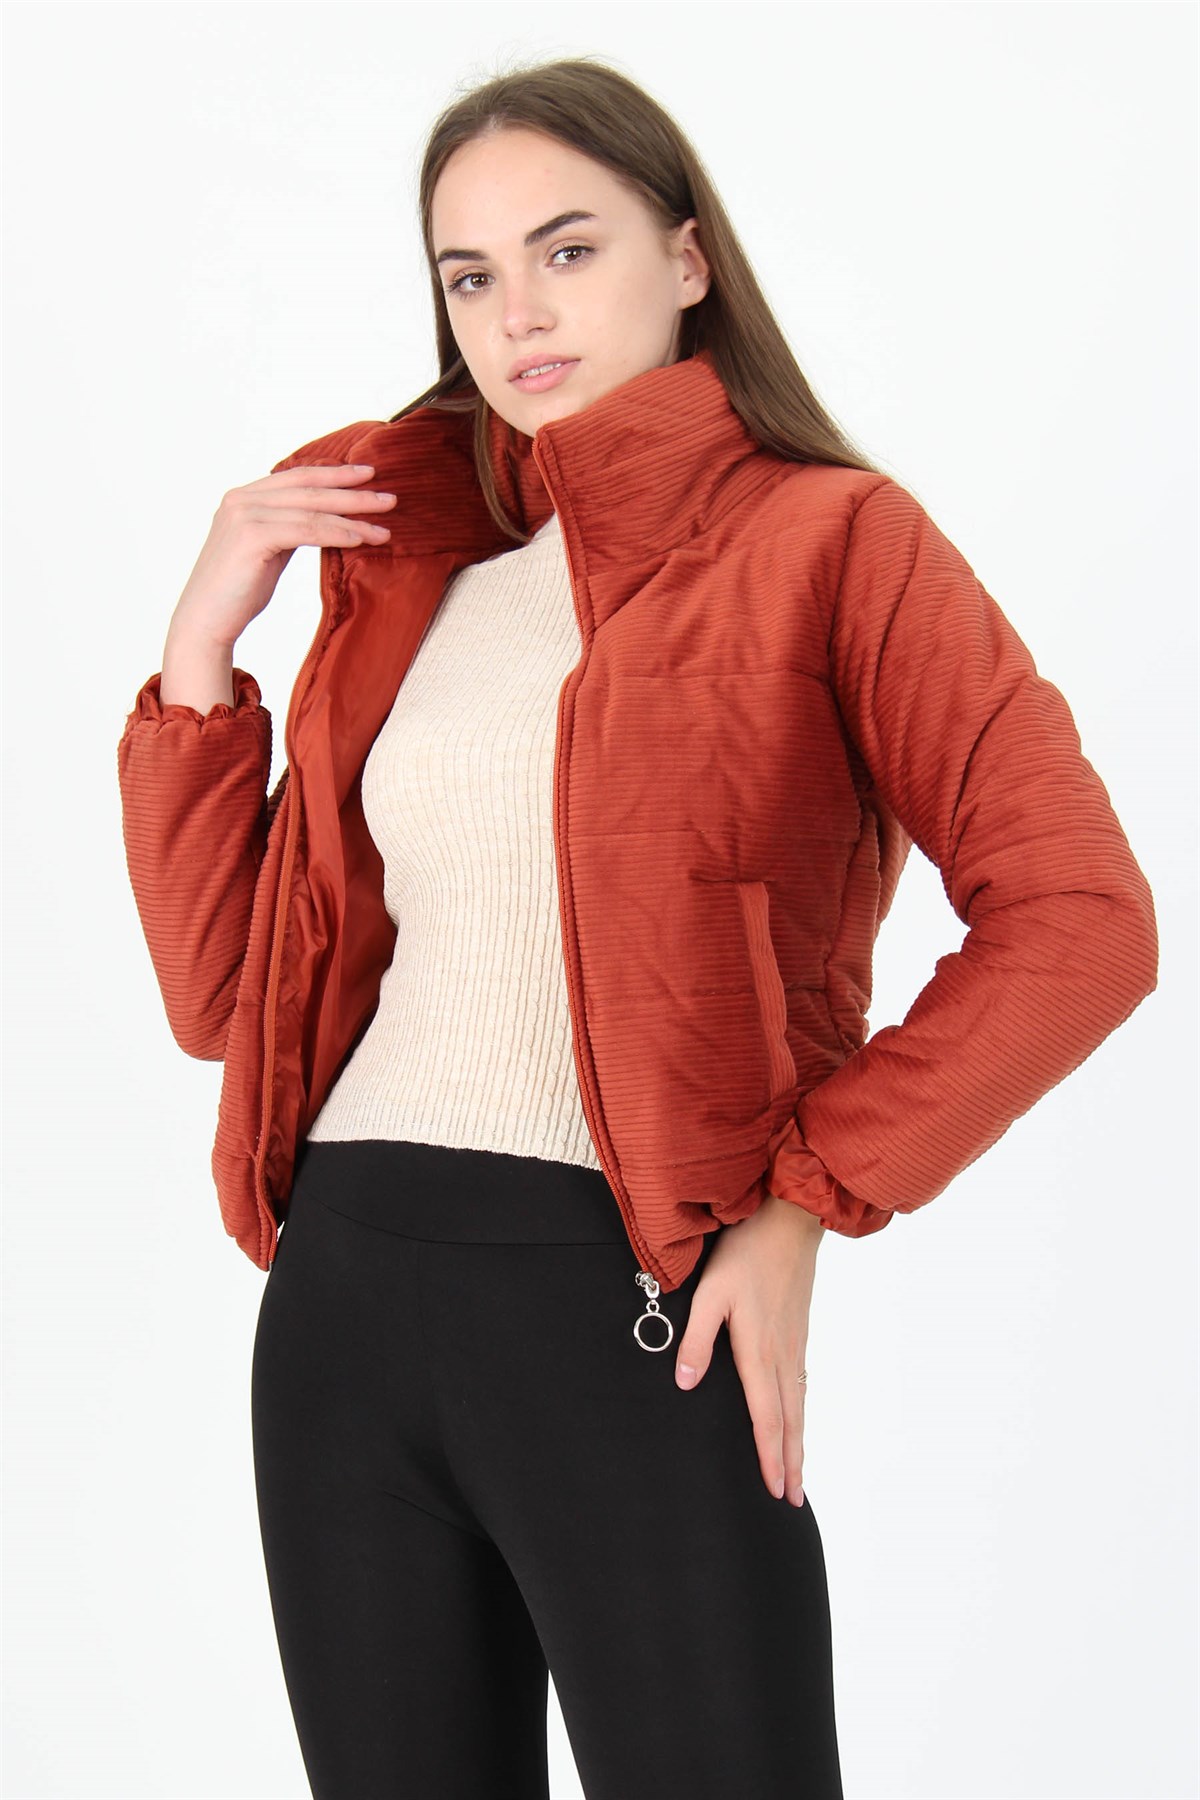 A model wears 35018 - Coat - Brick Red, wholesale Coat of Mode Roy to display at Lonca